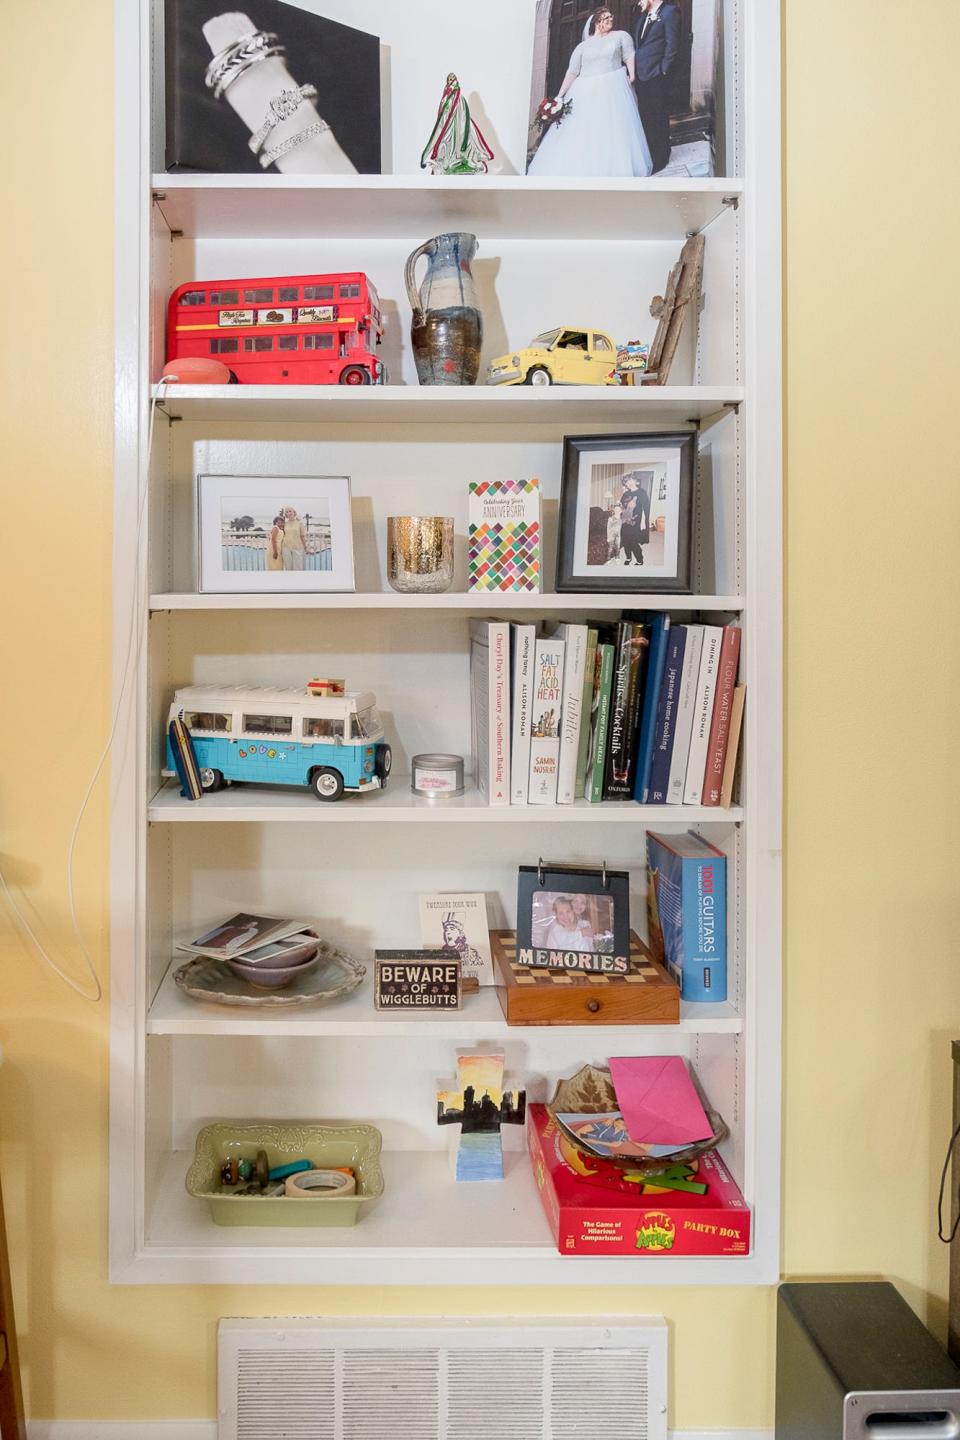 The built-in shelves were an added feature for the new homeowners who like to display books and collectible items.